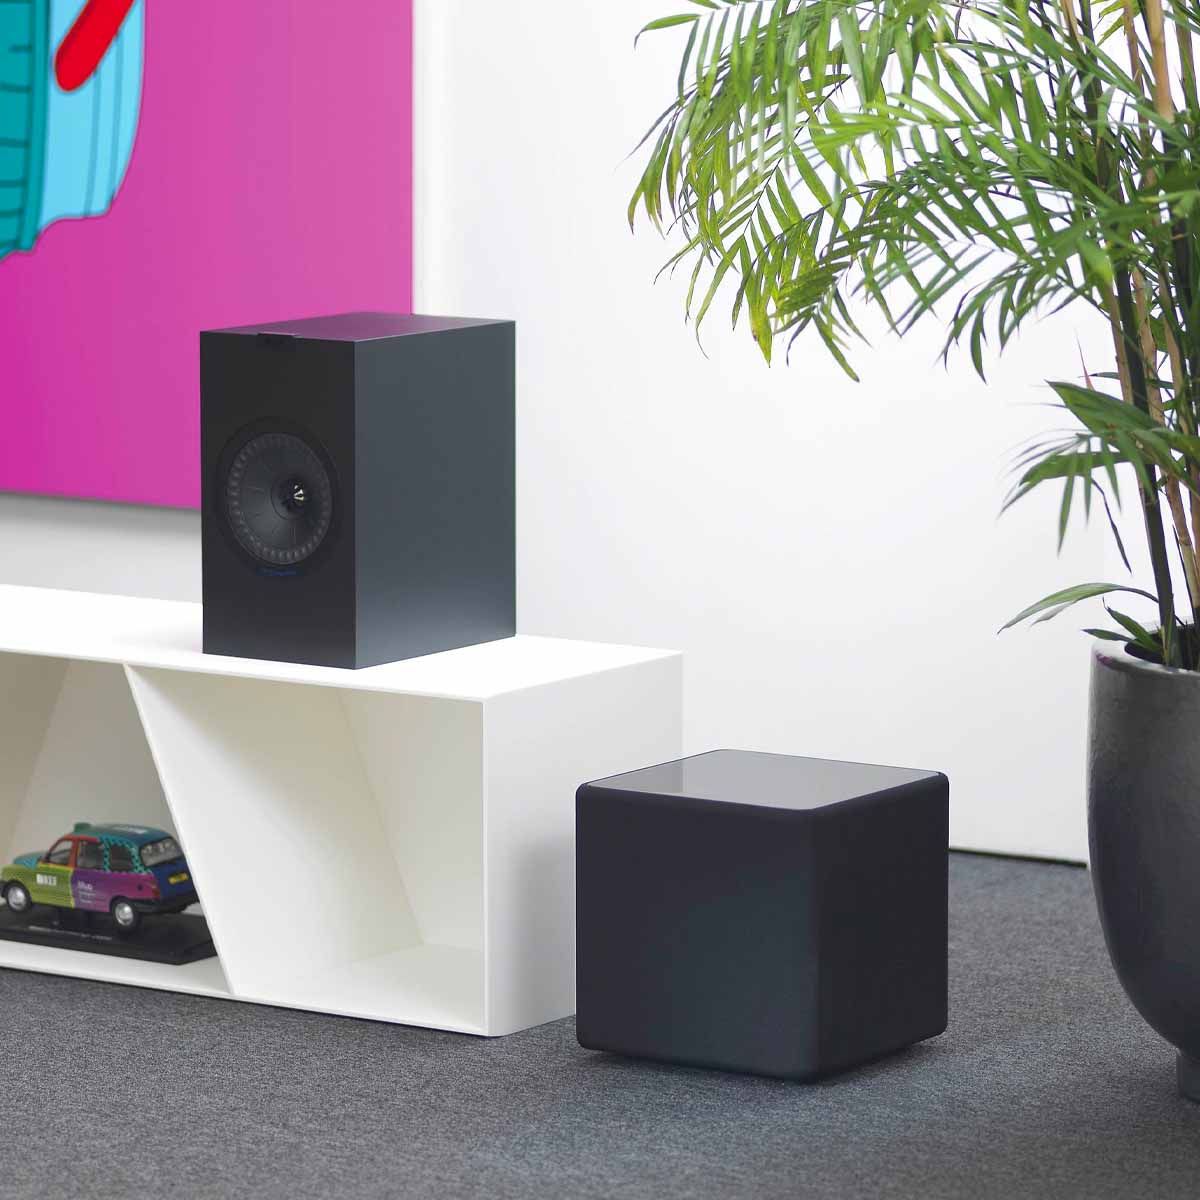 KEF KUBE8b 8-inch Bass Driver Active Subwoofer - Gloss Black - Each - sitting on floor next to media cabinet